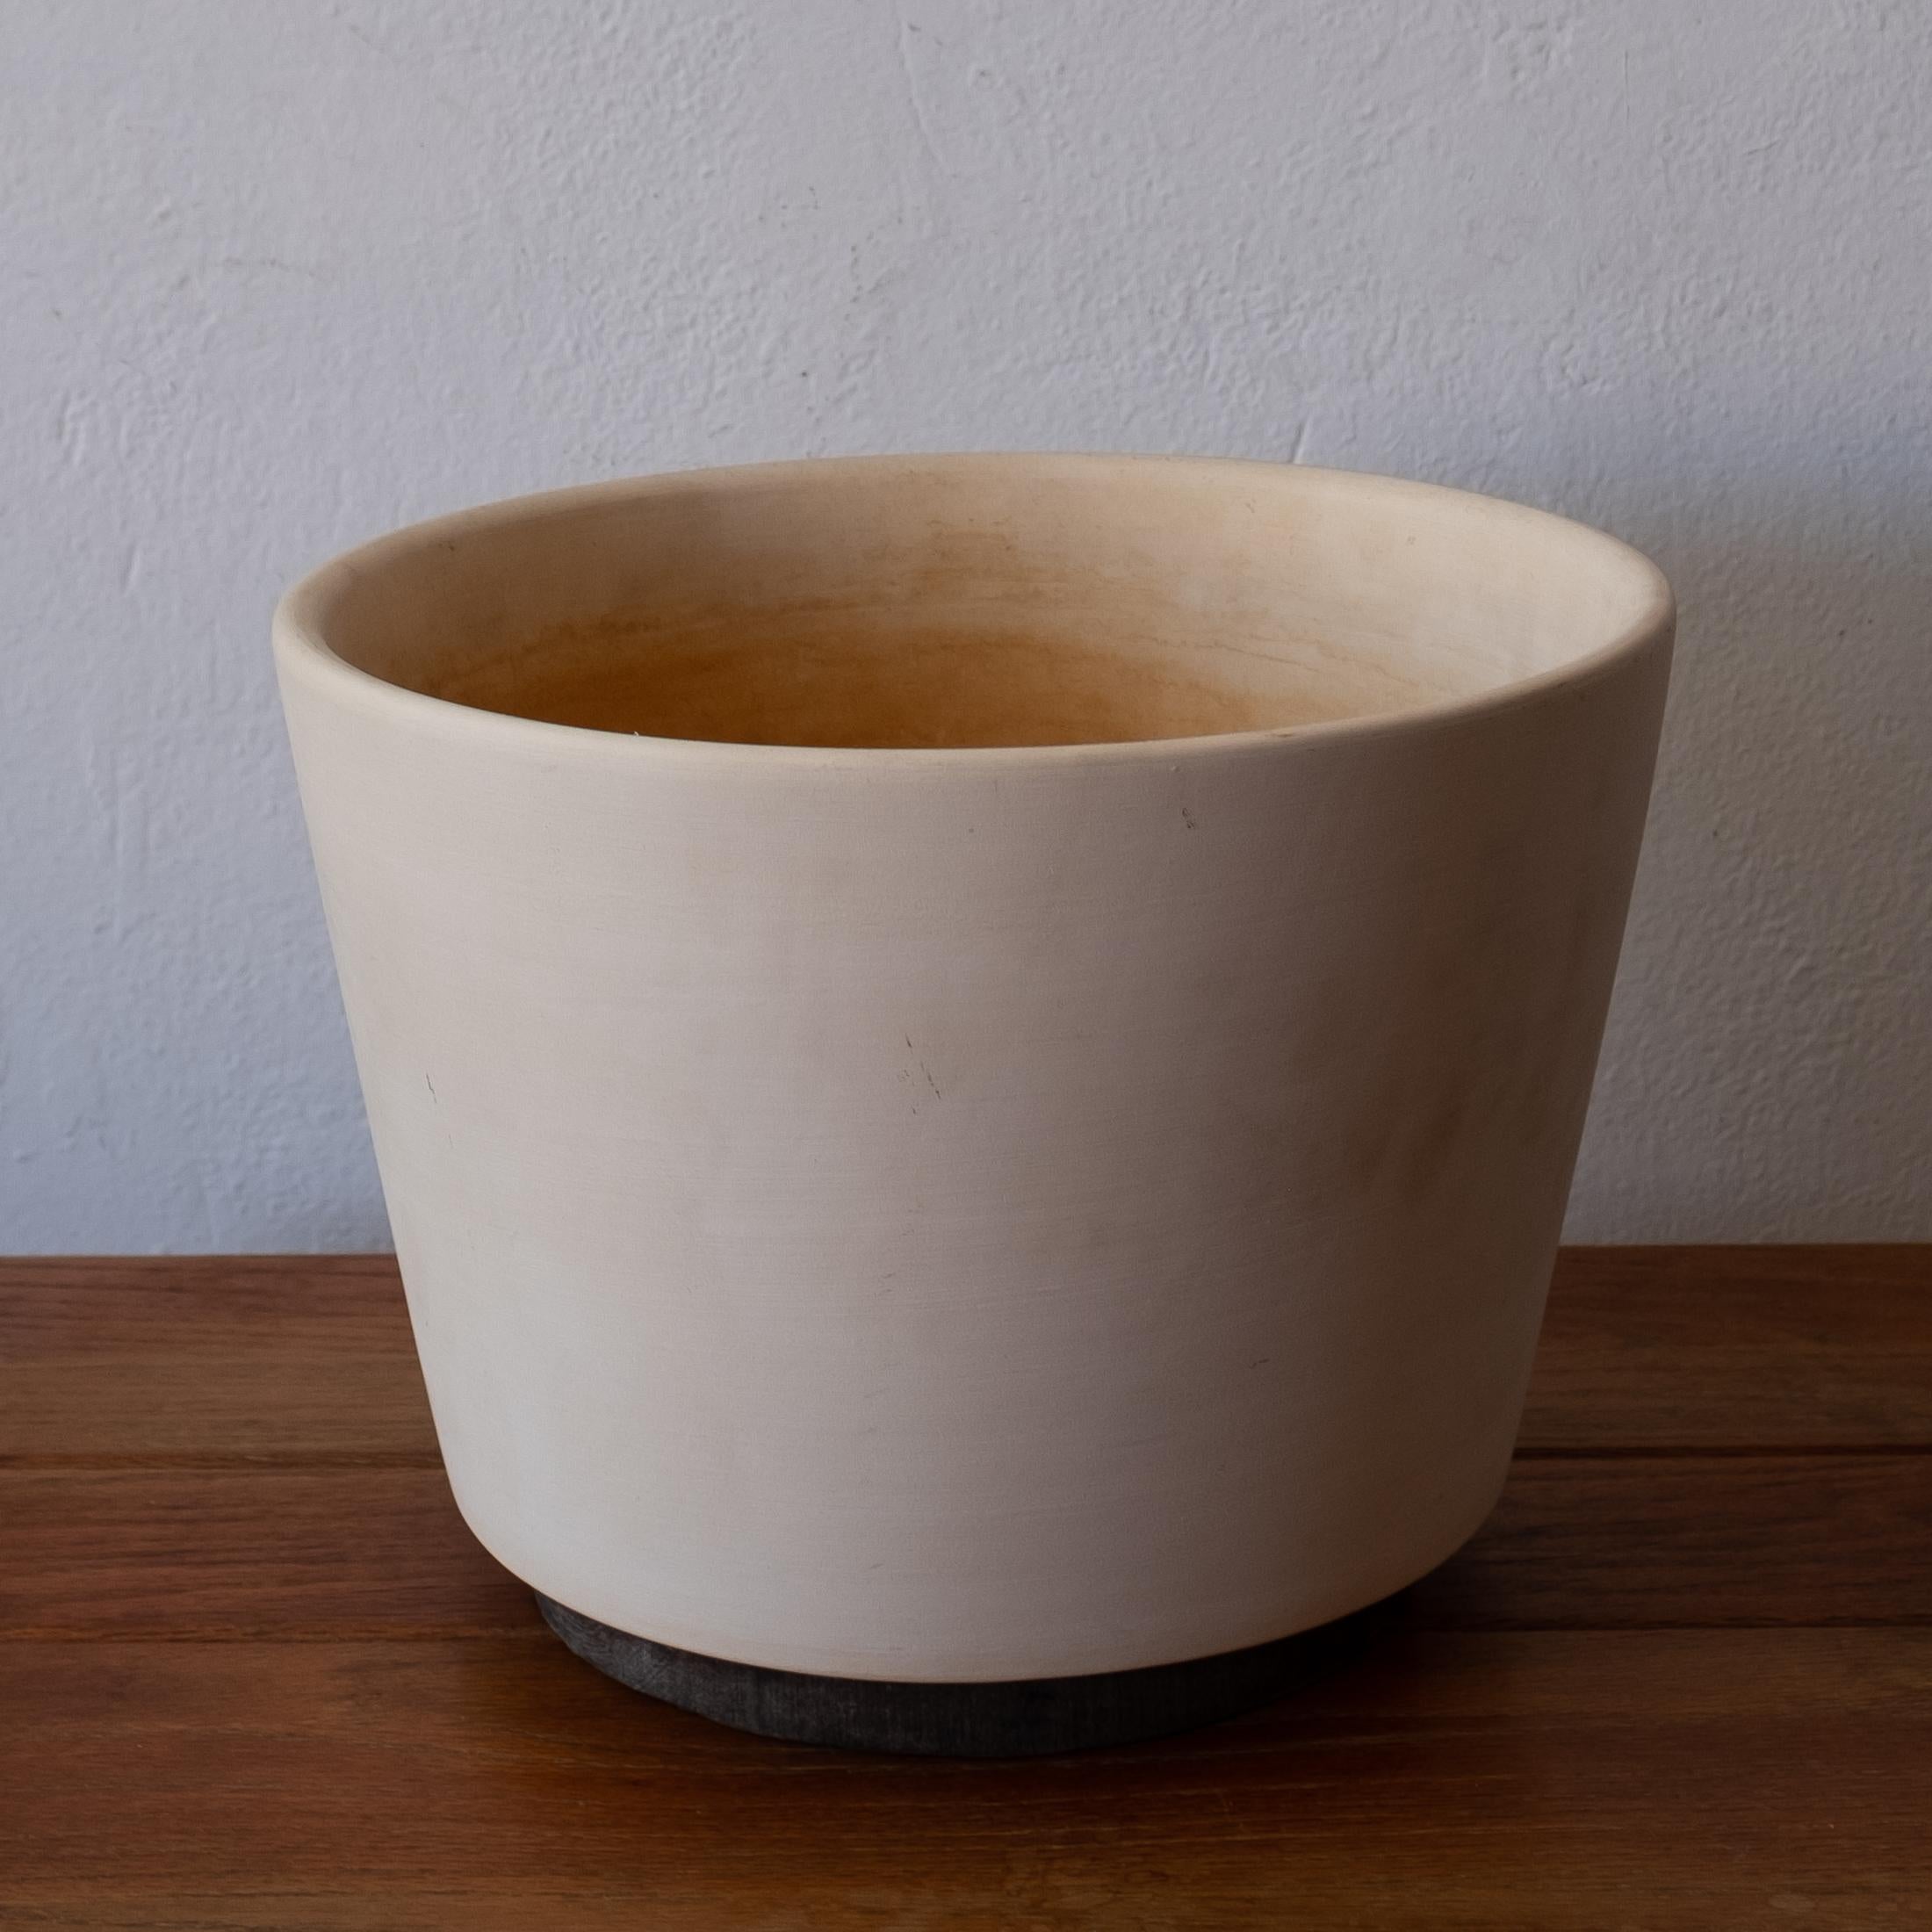 American Bisque Architectural Pottery Planter by Malcolm Leland, 1950s